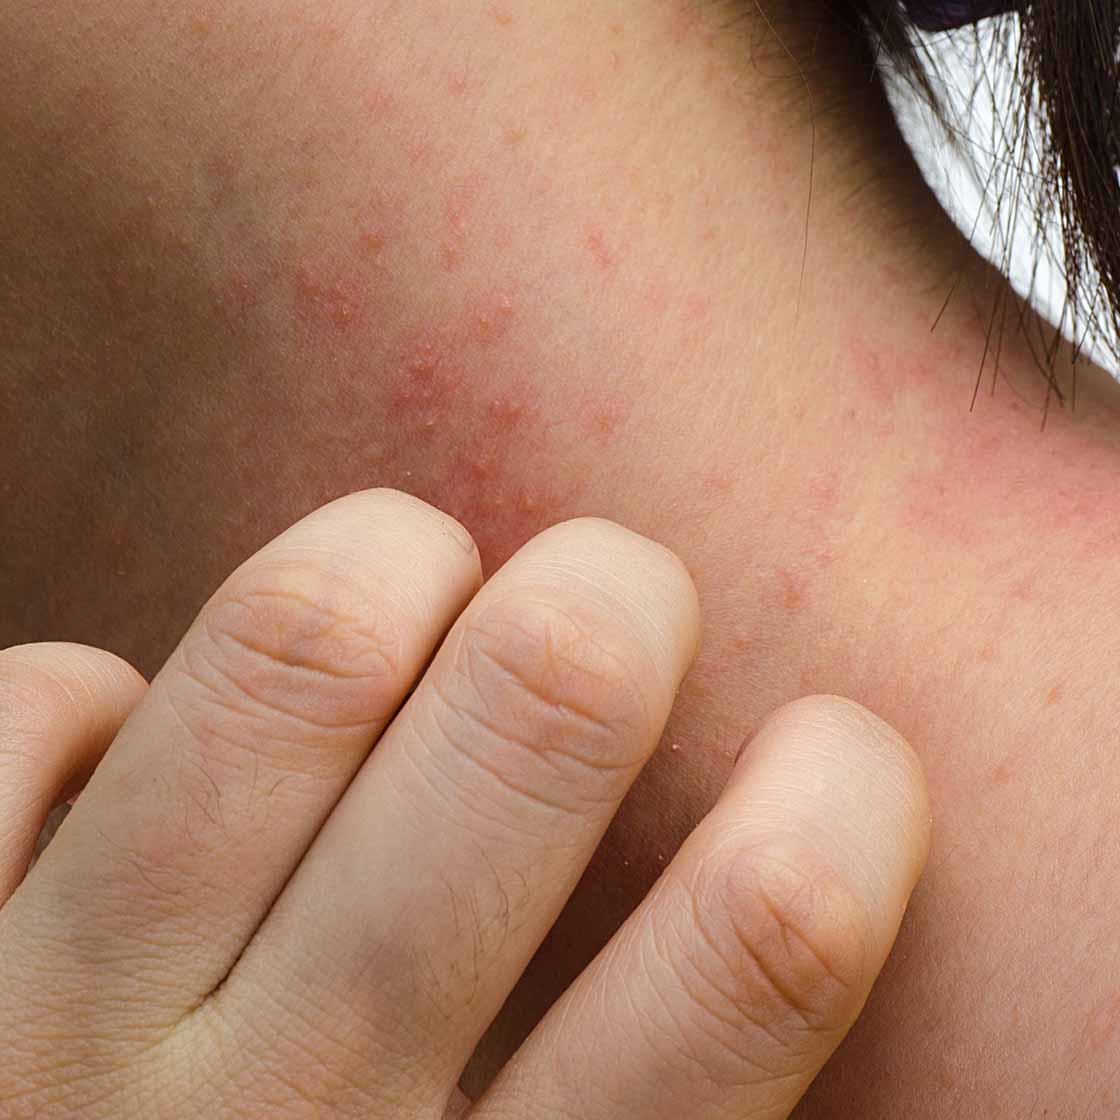 What Causes Eczema Flare-Ups?